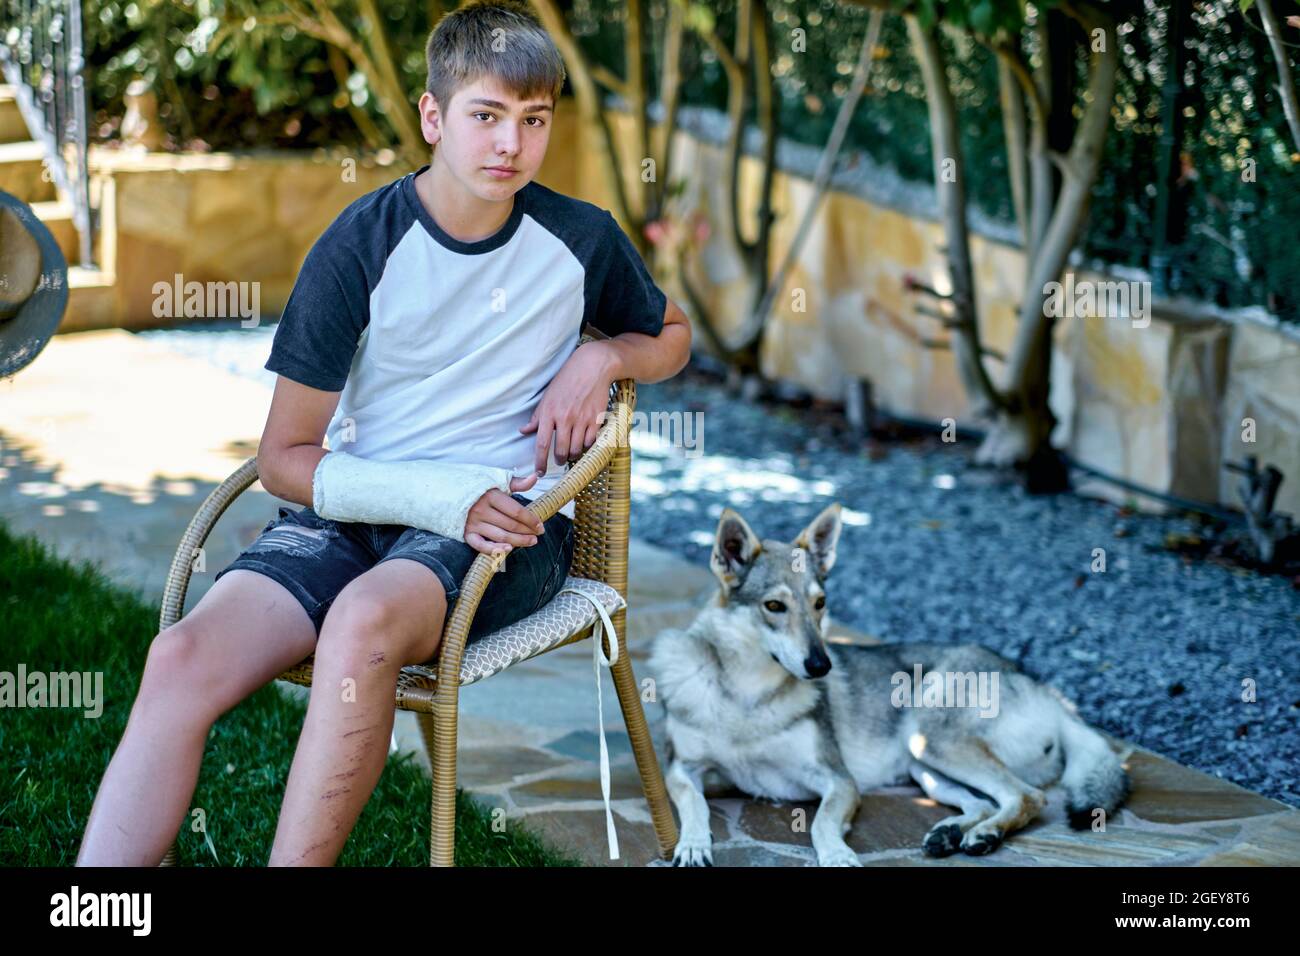 Portrait of young caucasian boy with a broken and cast arm sitting in a chair outdoor in a garden with a dog. Lifestyle concept. Stock Photo